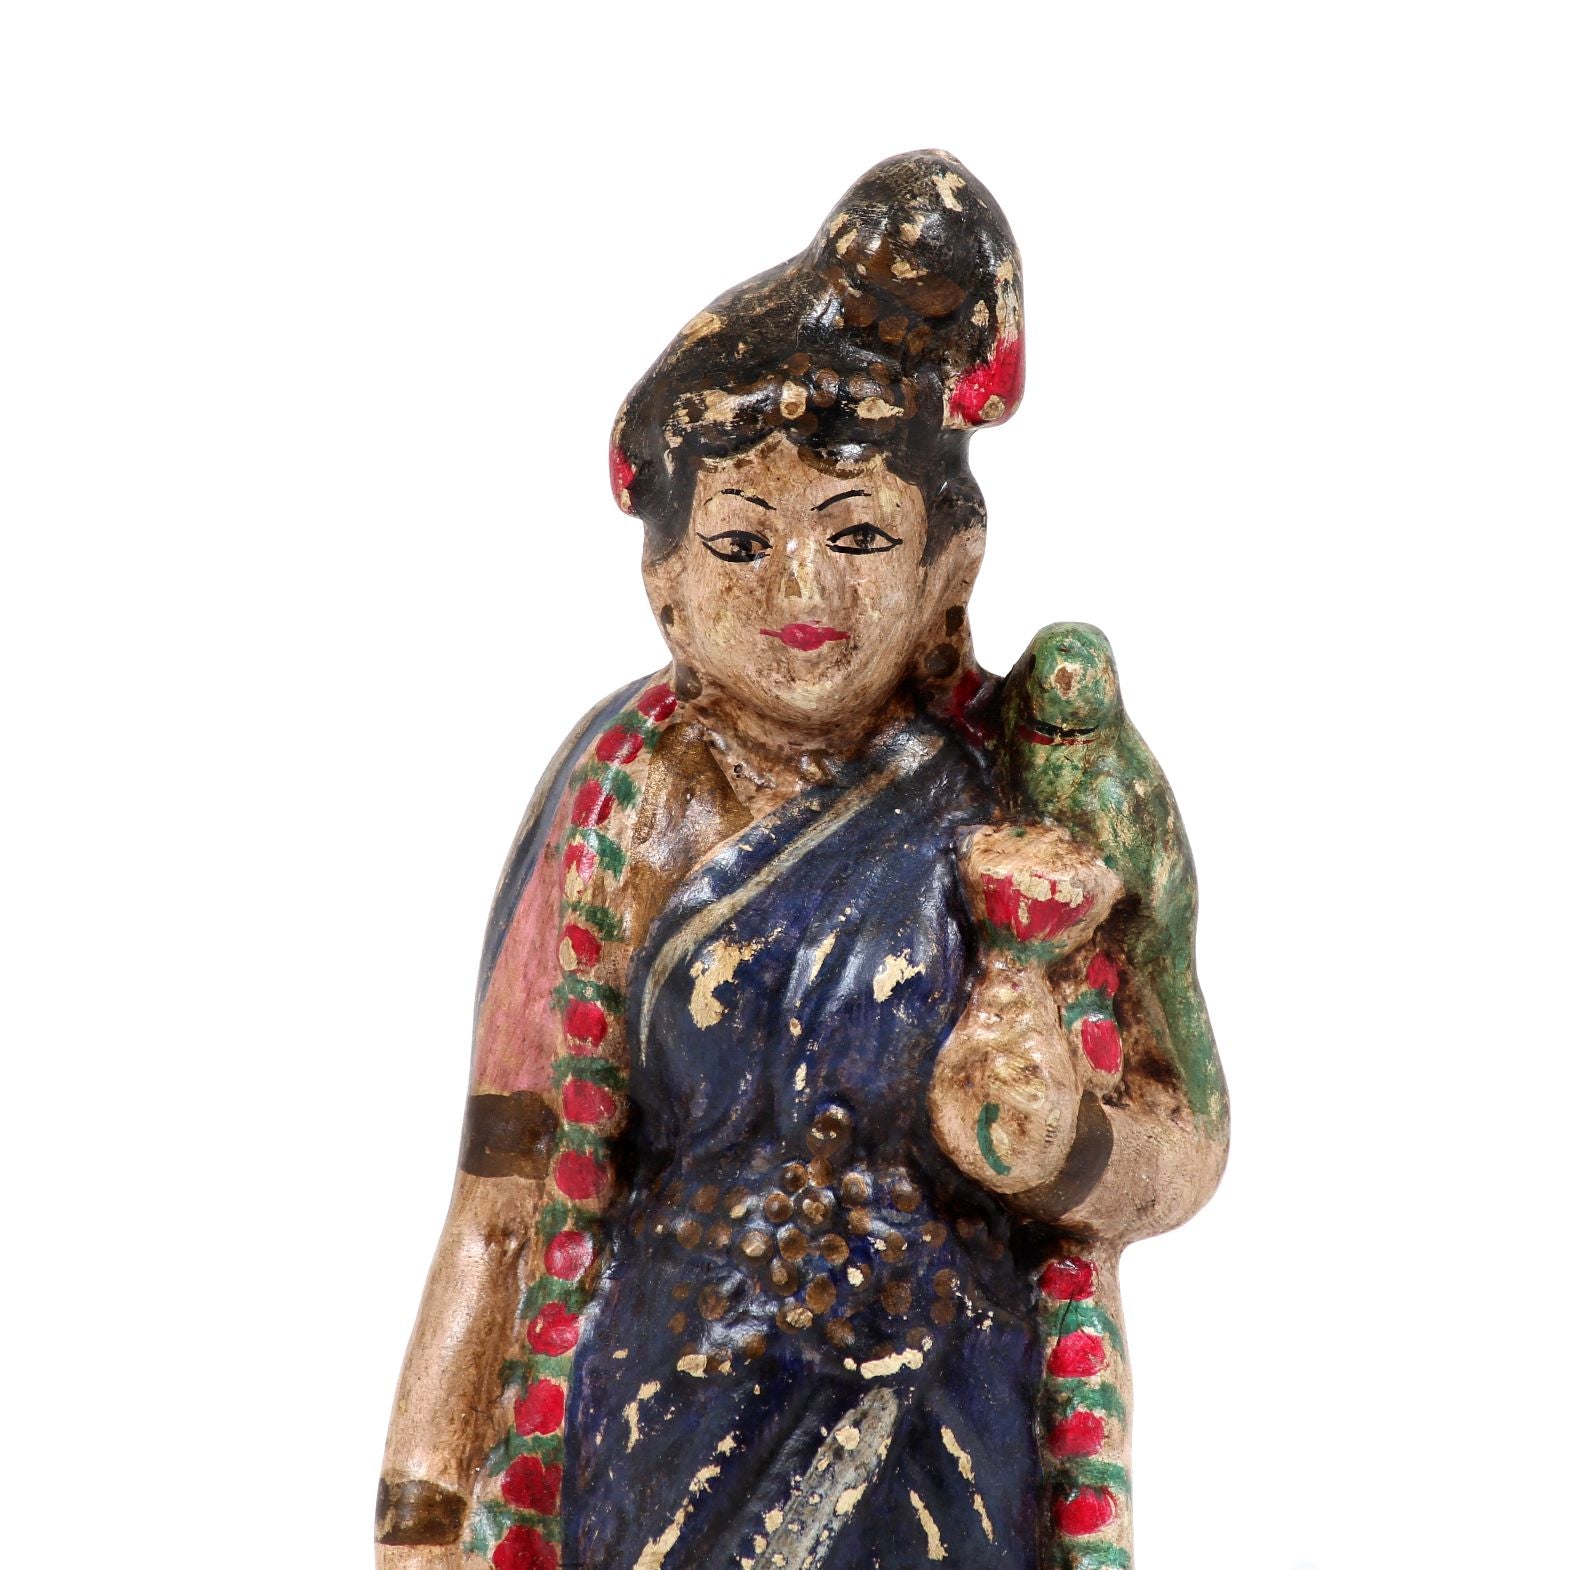 Epic Story Devi PM Statuette , Home Objects , Display , Paper mache Table Top